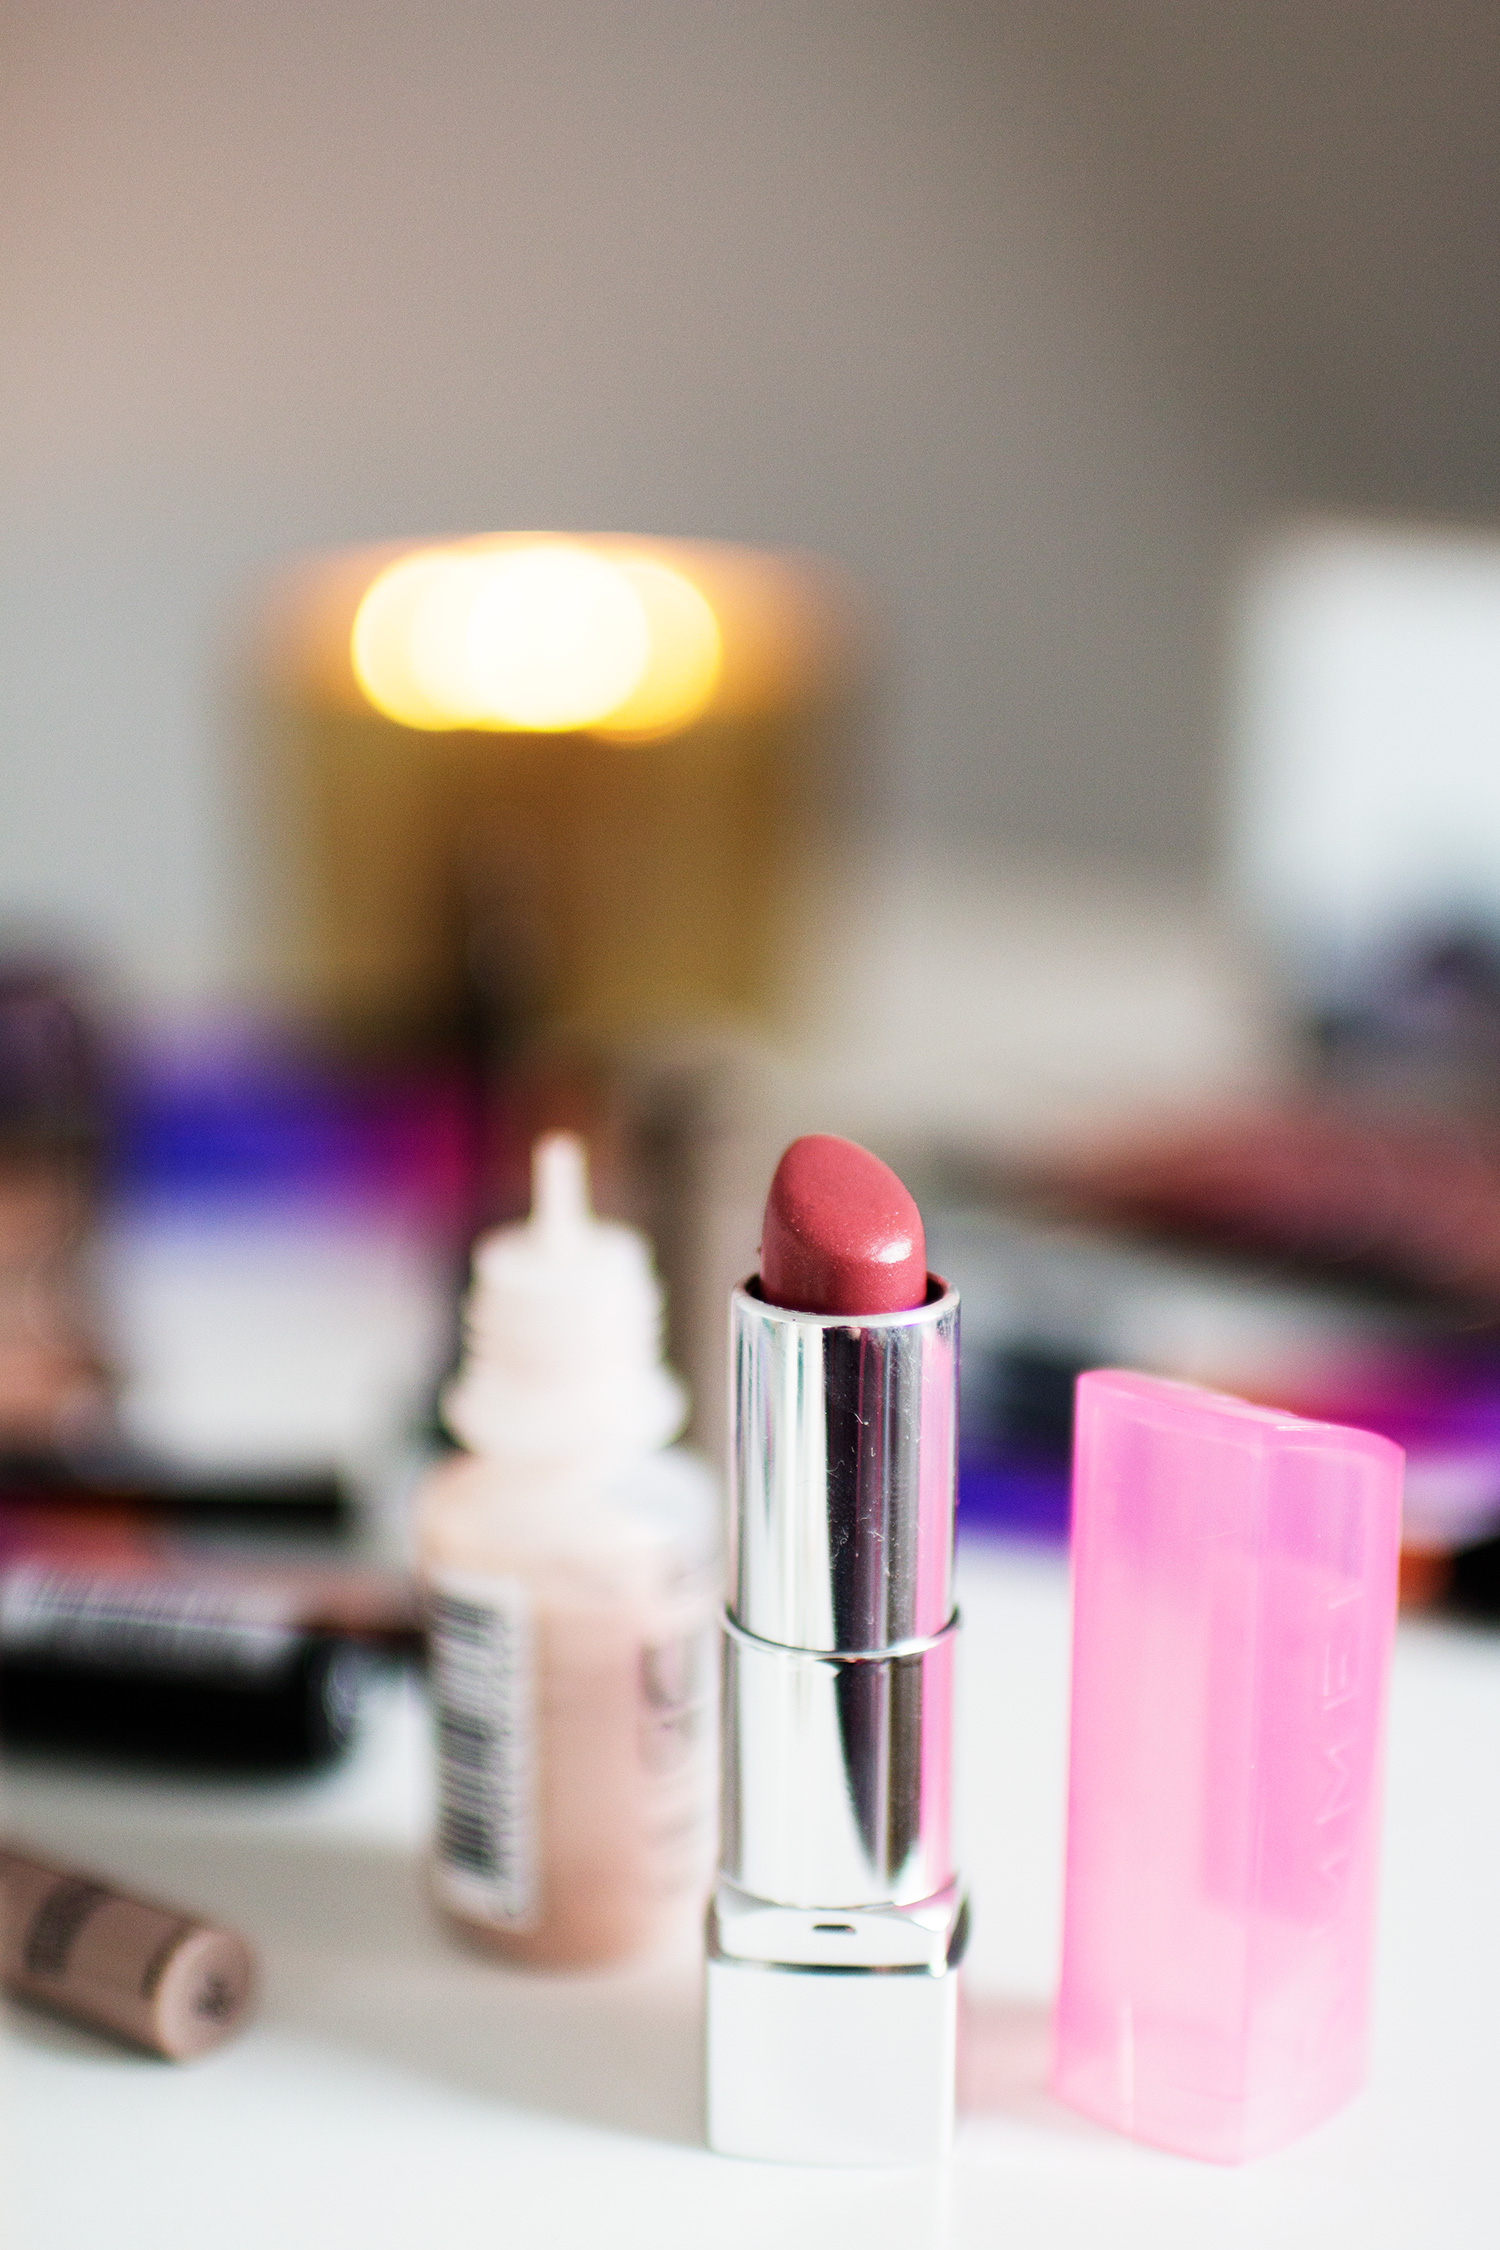 Rimmel Moisture Renew Sheer &amp; Shine Lipstick in Good Mauve. Photography by Alice Red.